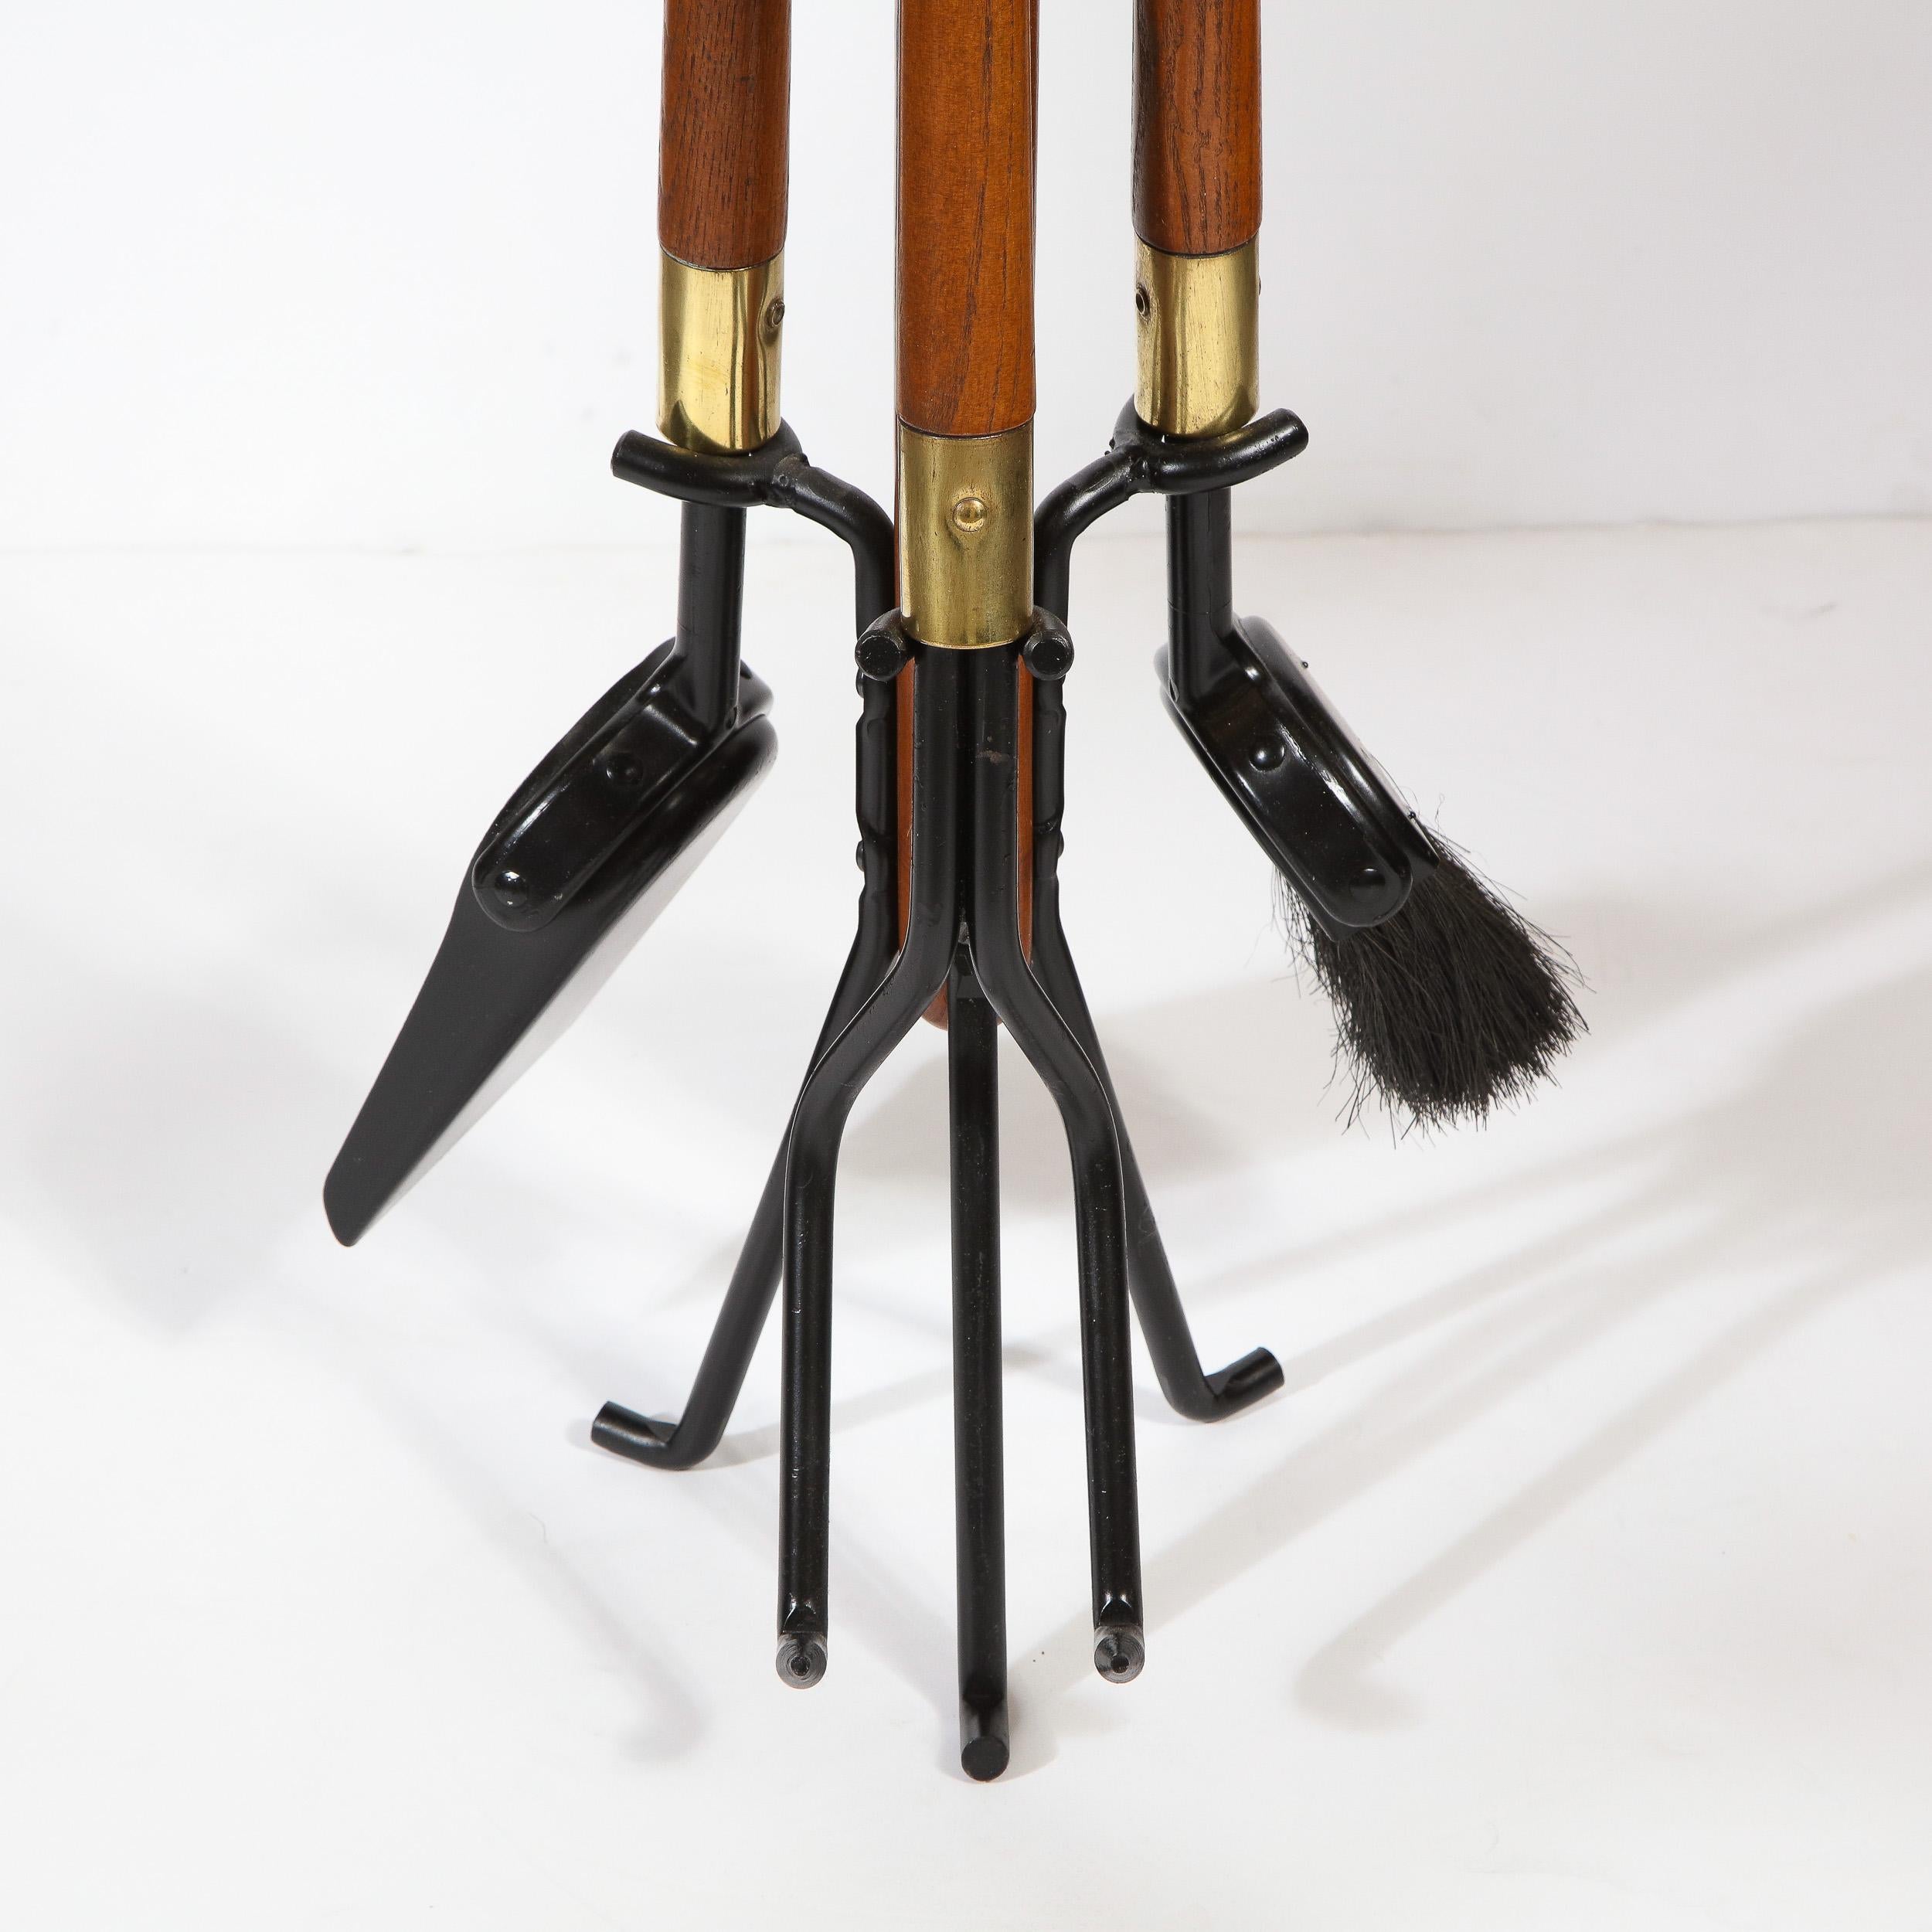 This refined Mid-Century Modern four piece fire tool set was realized in the United States, circa 1960. It features a poker, brush and shovel with hand rubbed walnut handles offering rounded subtly protuberant ends, and black enamel bottoms with